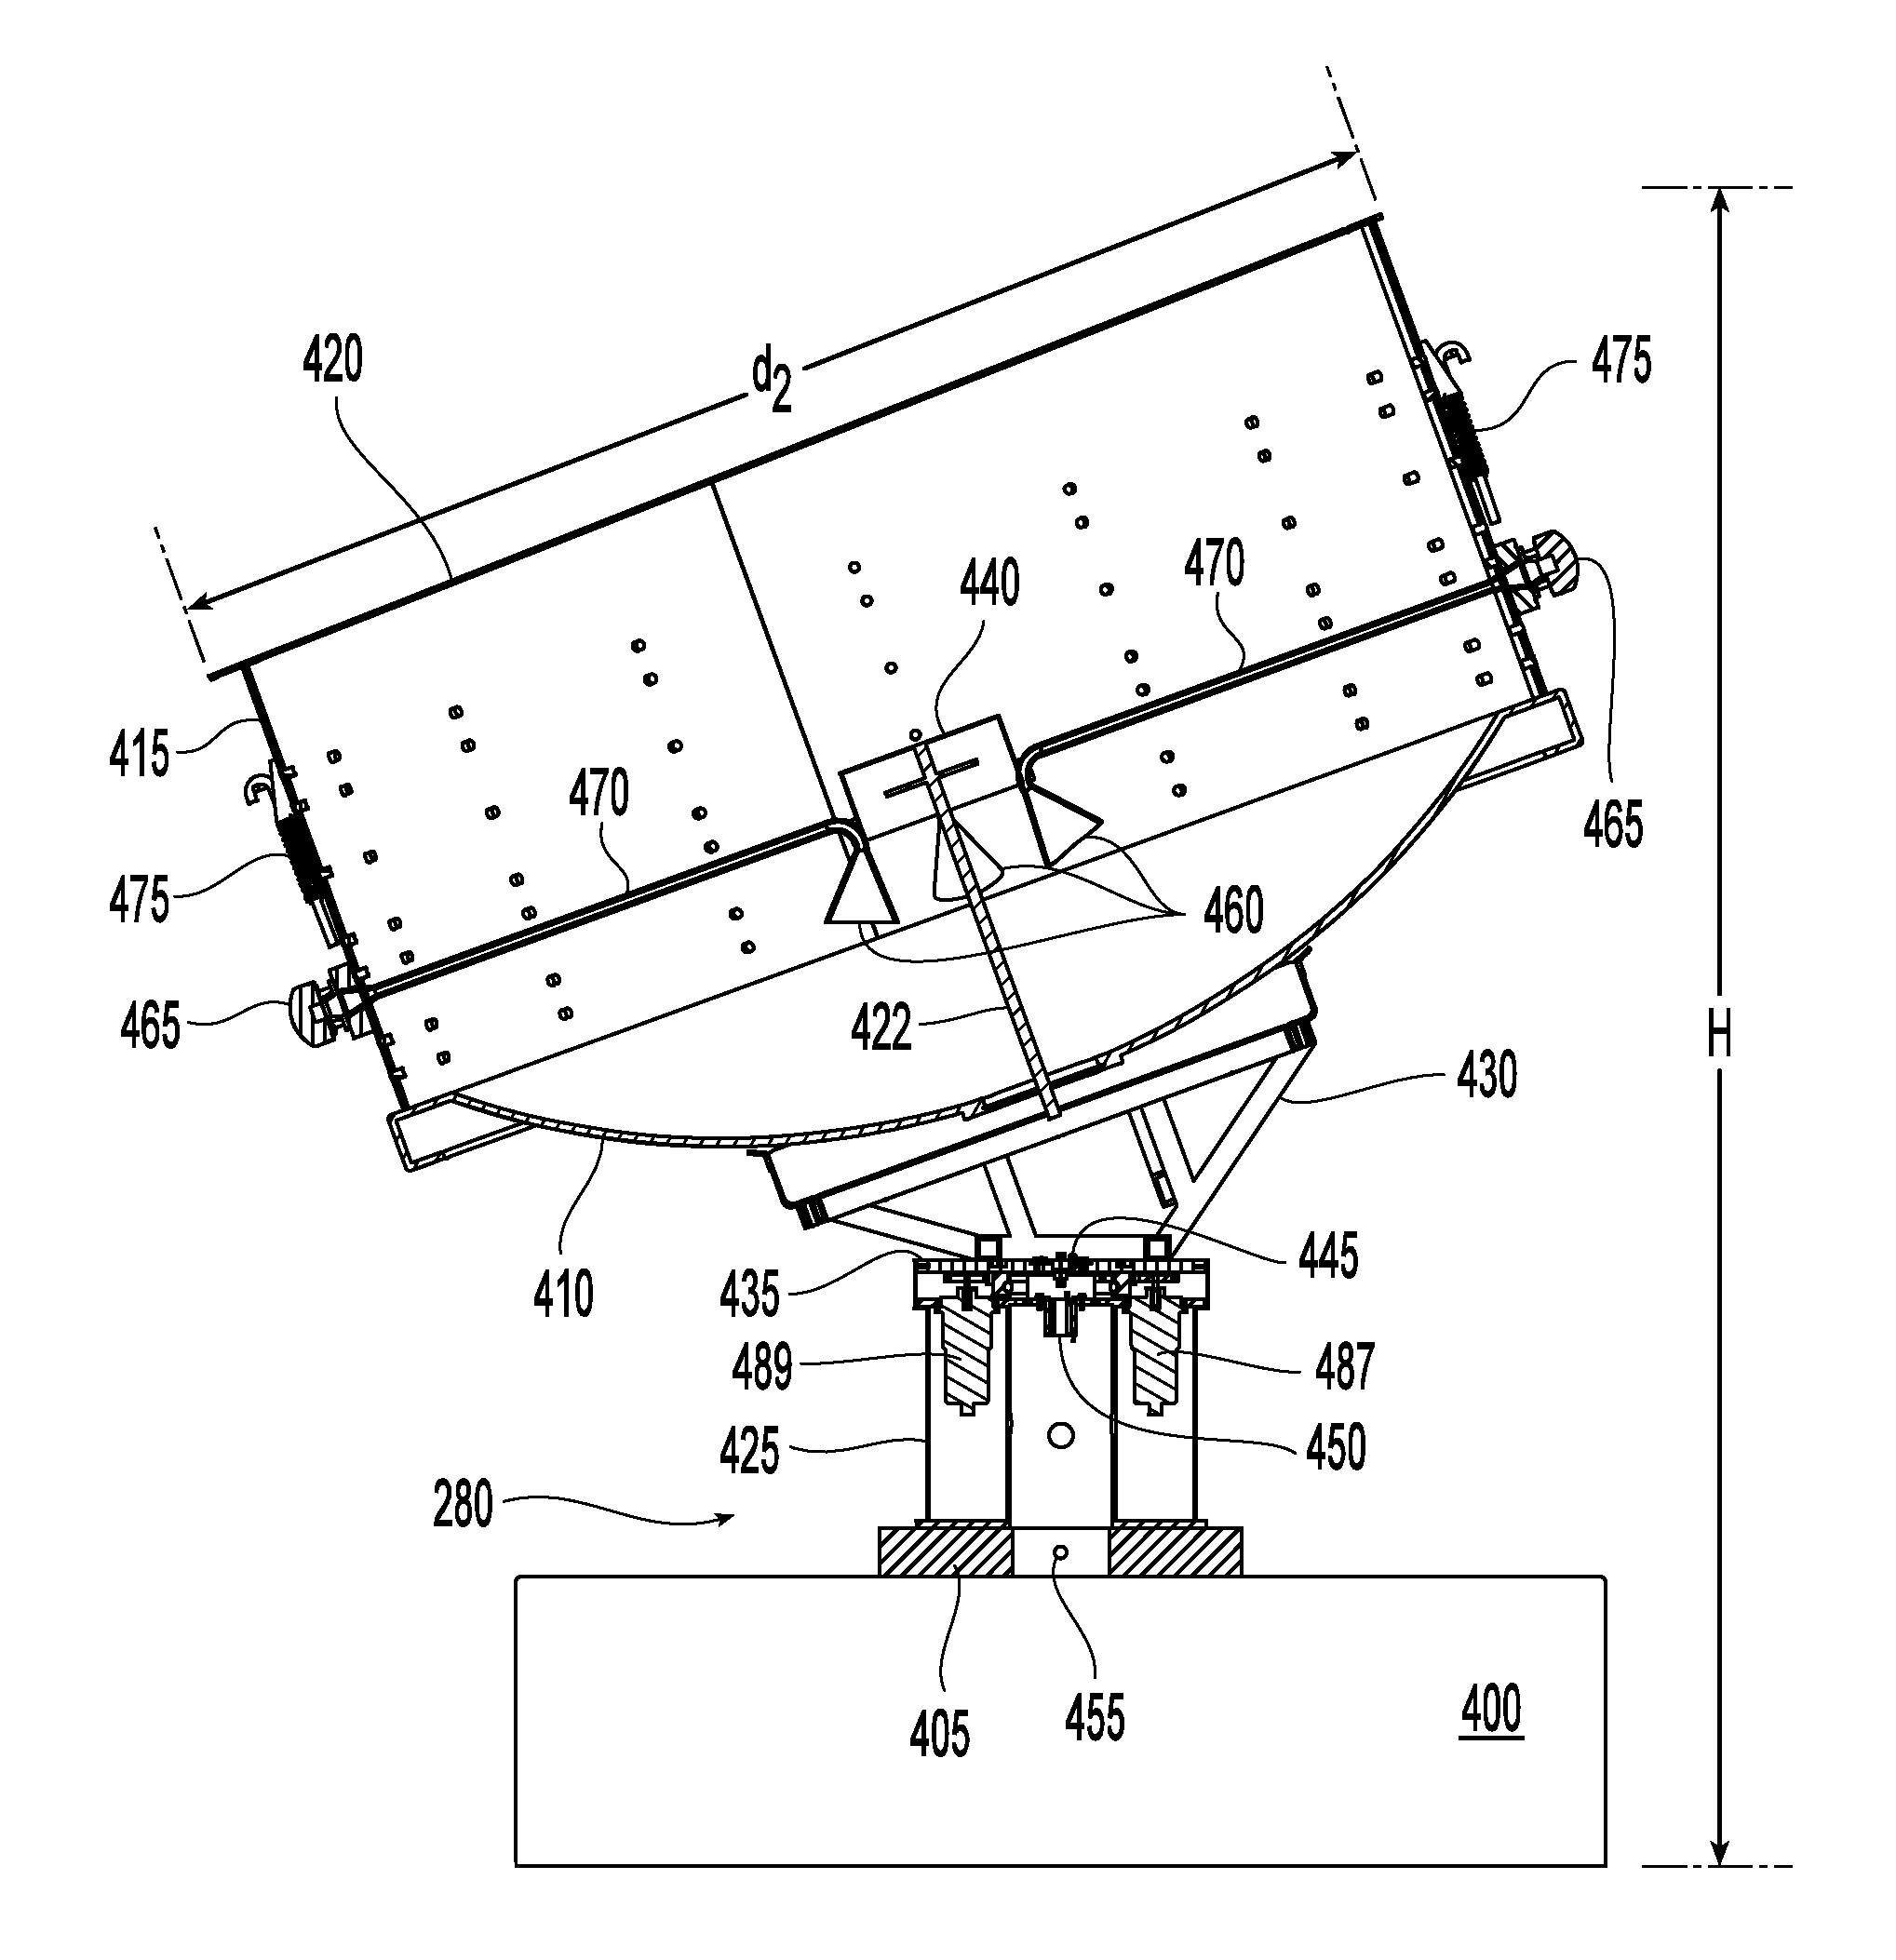 Rotational parabolic antenna with various feed configurations